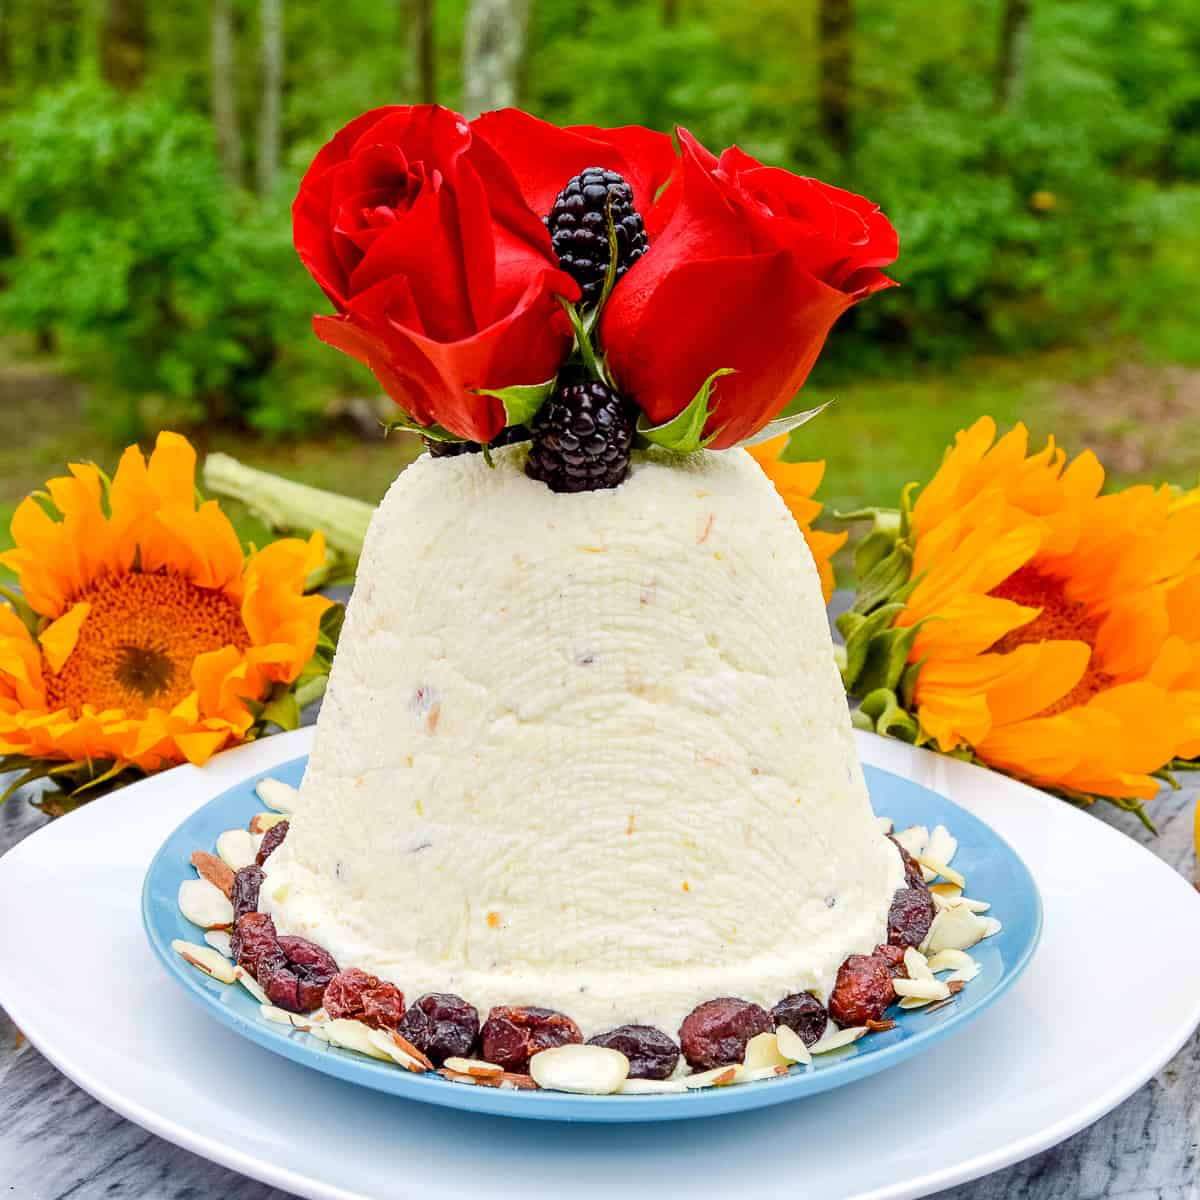 Paskha (Russian/Ukrainian) Crustless Cheesecake with roses and blackberries on top, sunflowers in the background